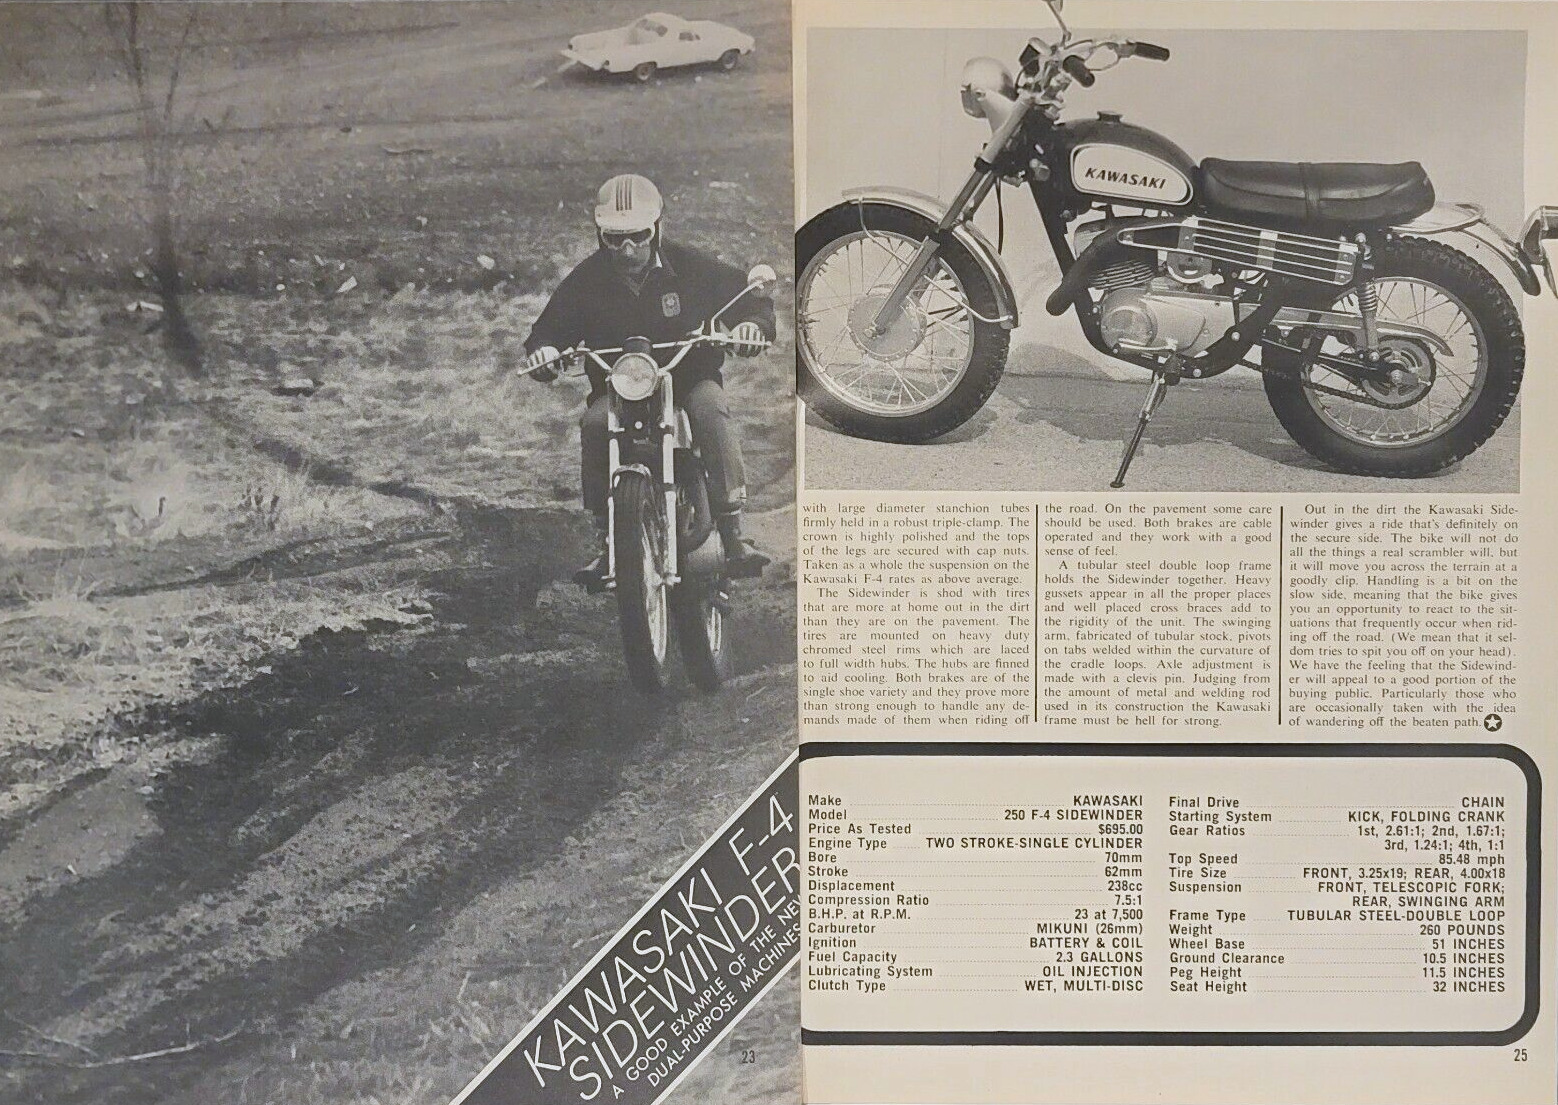 1971 Kawasaki F4 Sidewinder 3pg test Article With specs